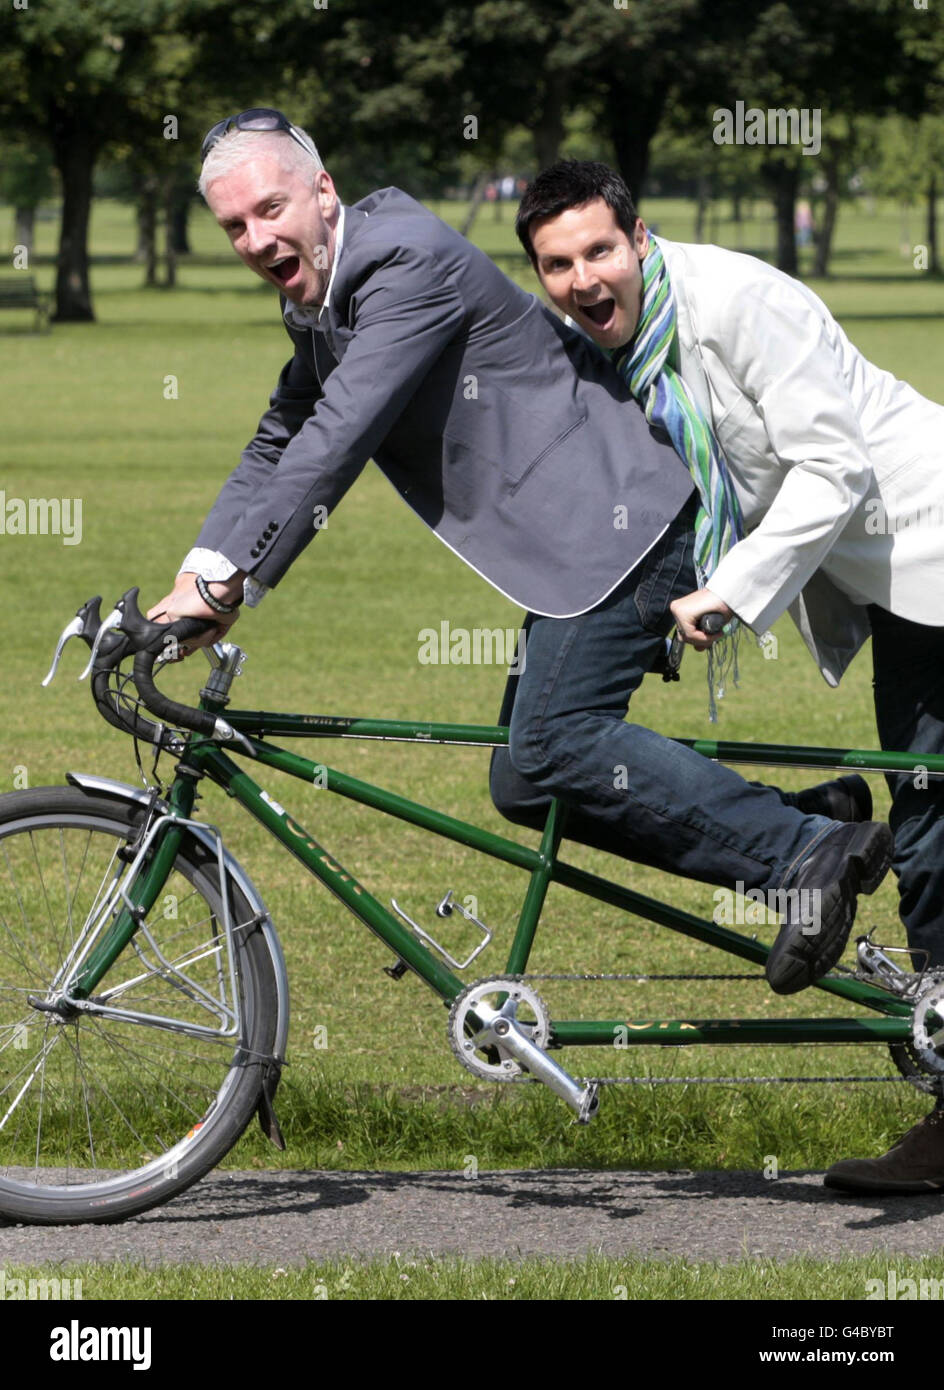 Scottish design duo Colin and Justin in Edinburgh as they test their bikes in preparation for Bike Week which starts from June 16 with 250 events taking place across Scotland. Stock Photo